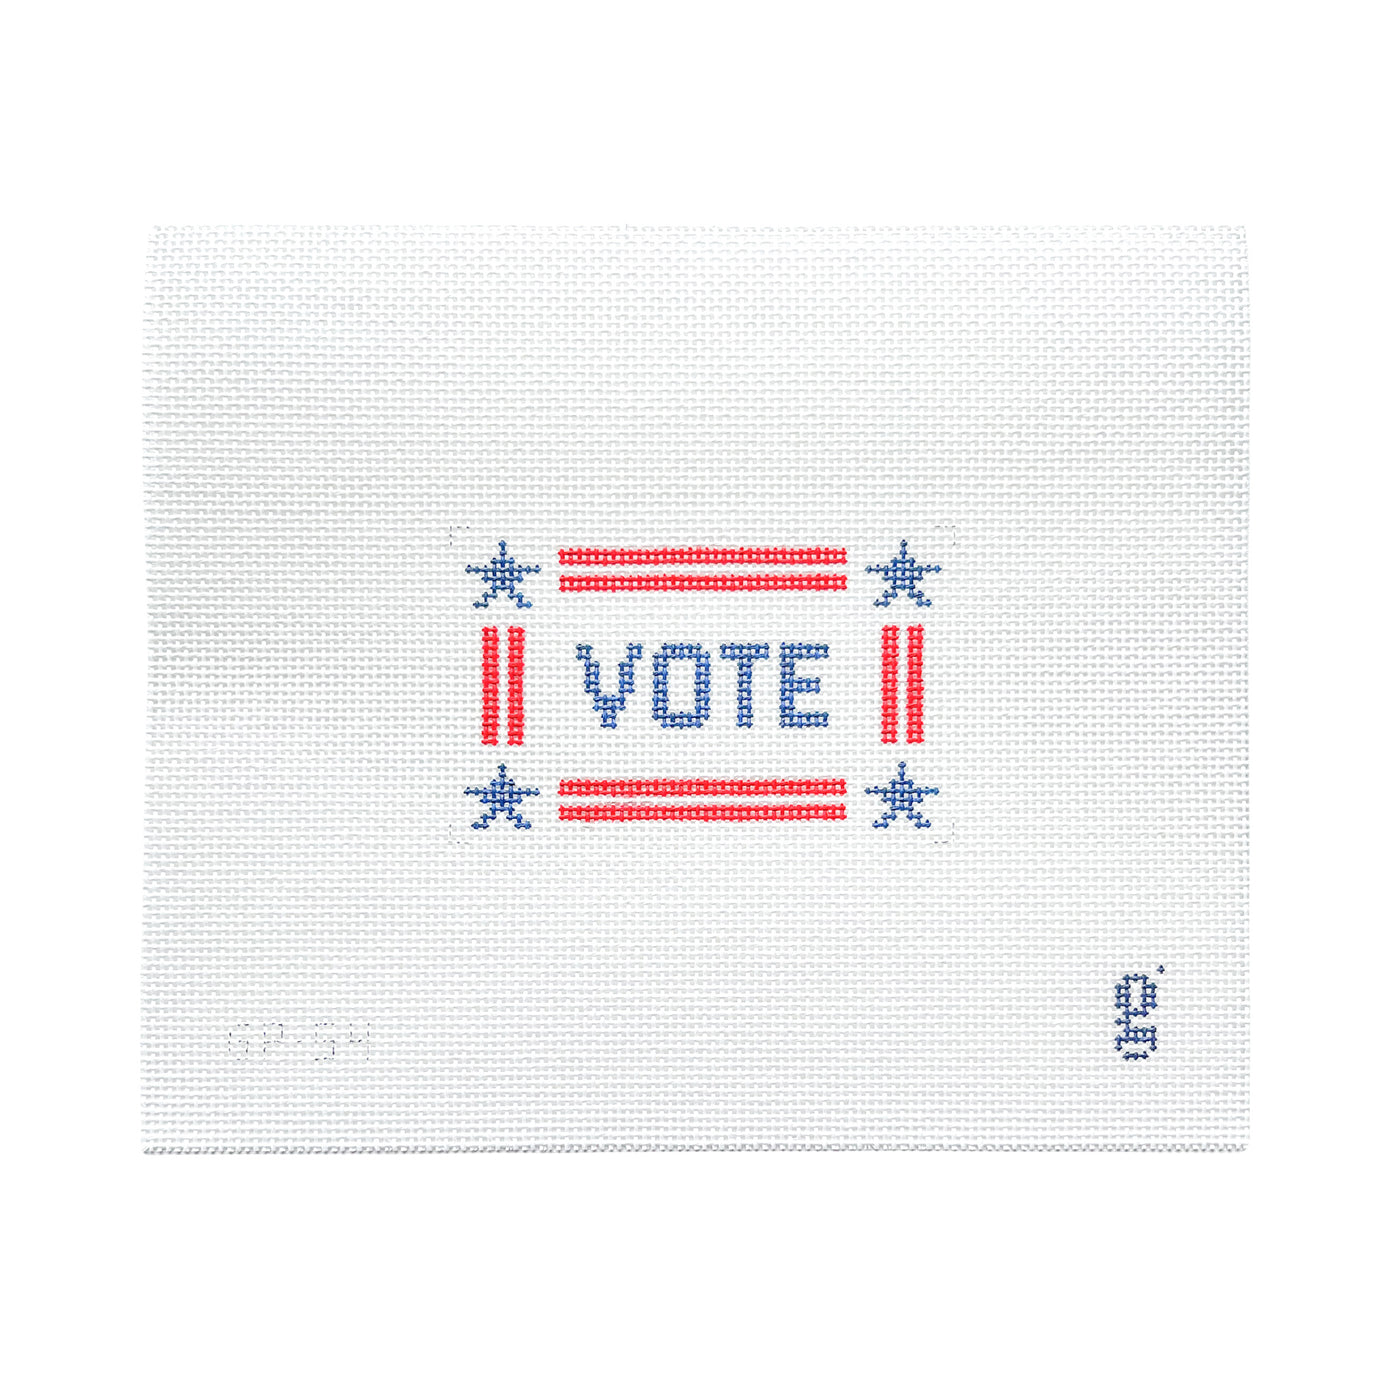 White needlepoint canvas with the word "VOTE" in navy block text at center, surrounded by a red stripe border and a navy star in each corner.